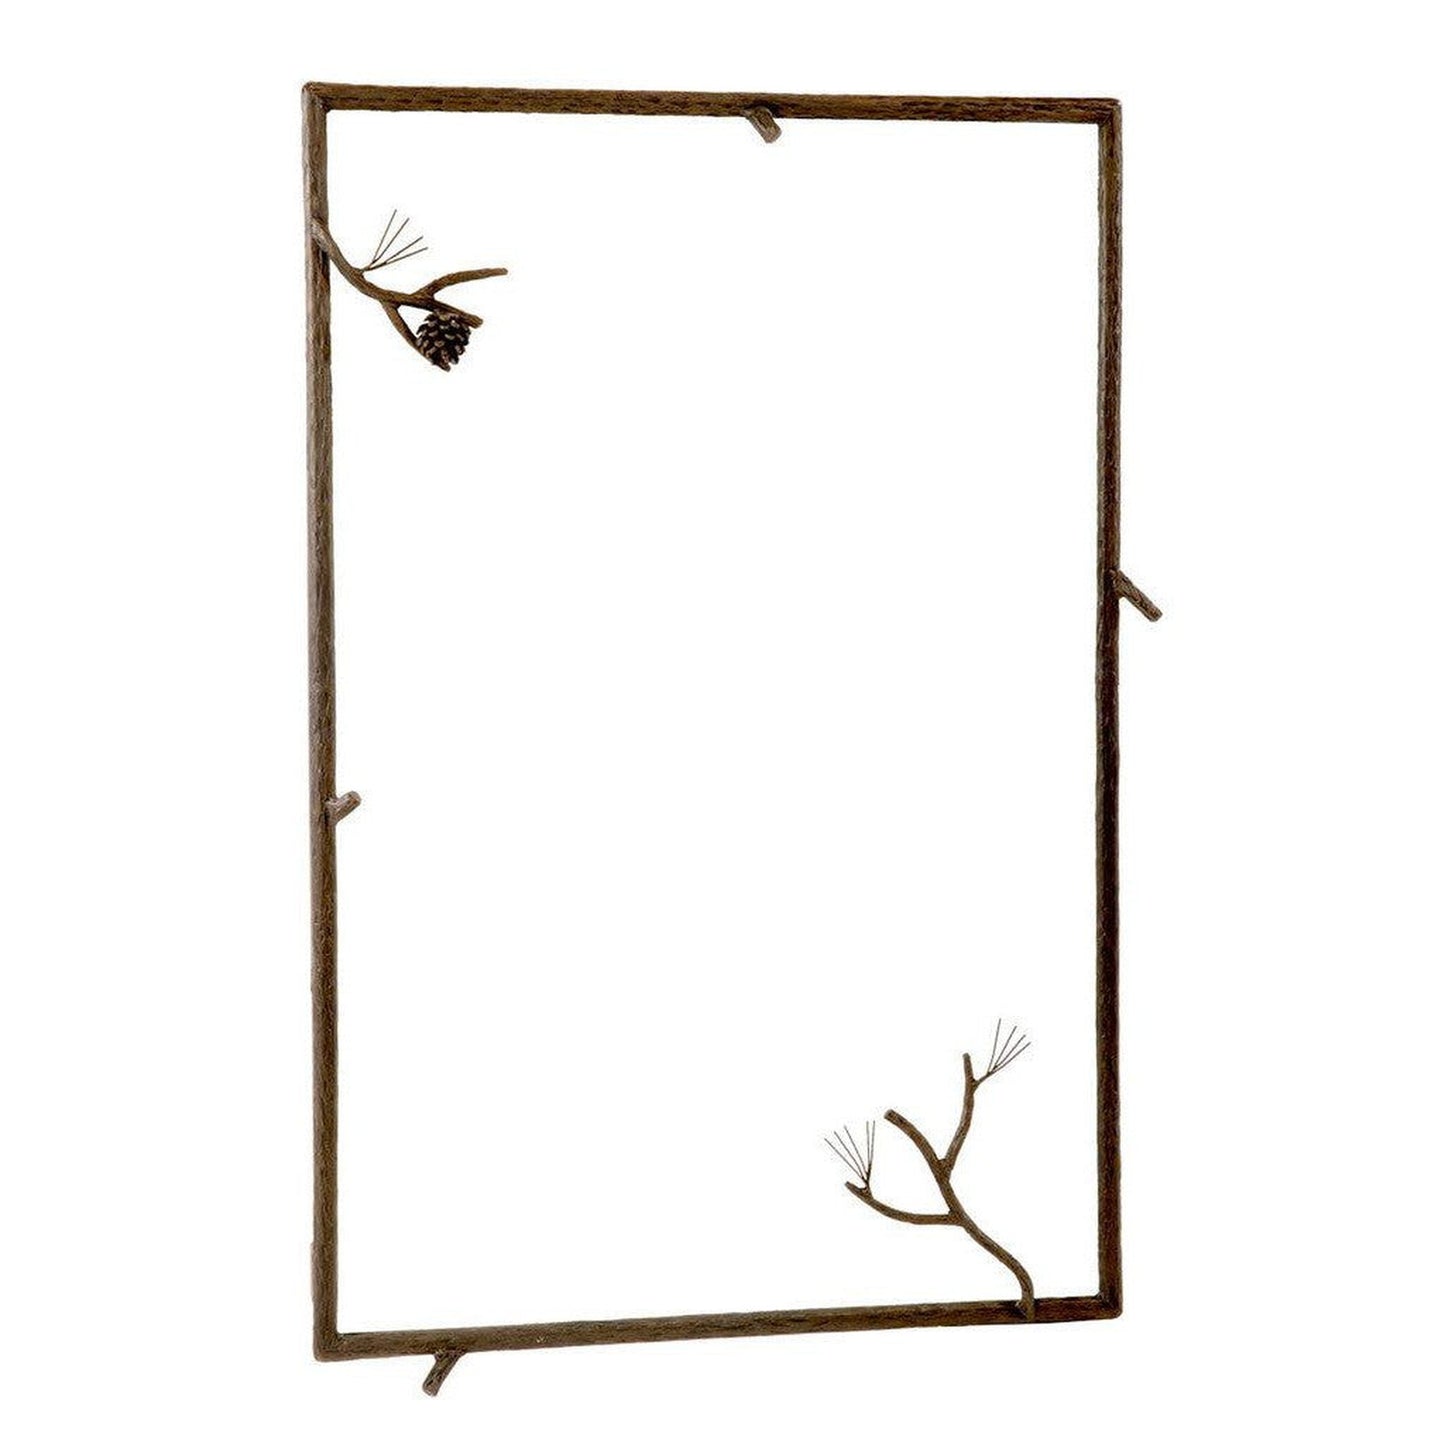 Stone County Ironworks Pine 37" x 25" Large Hand Rubbed Bronze Iron Wall Mirror